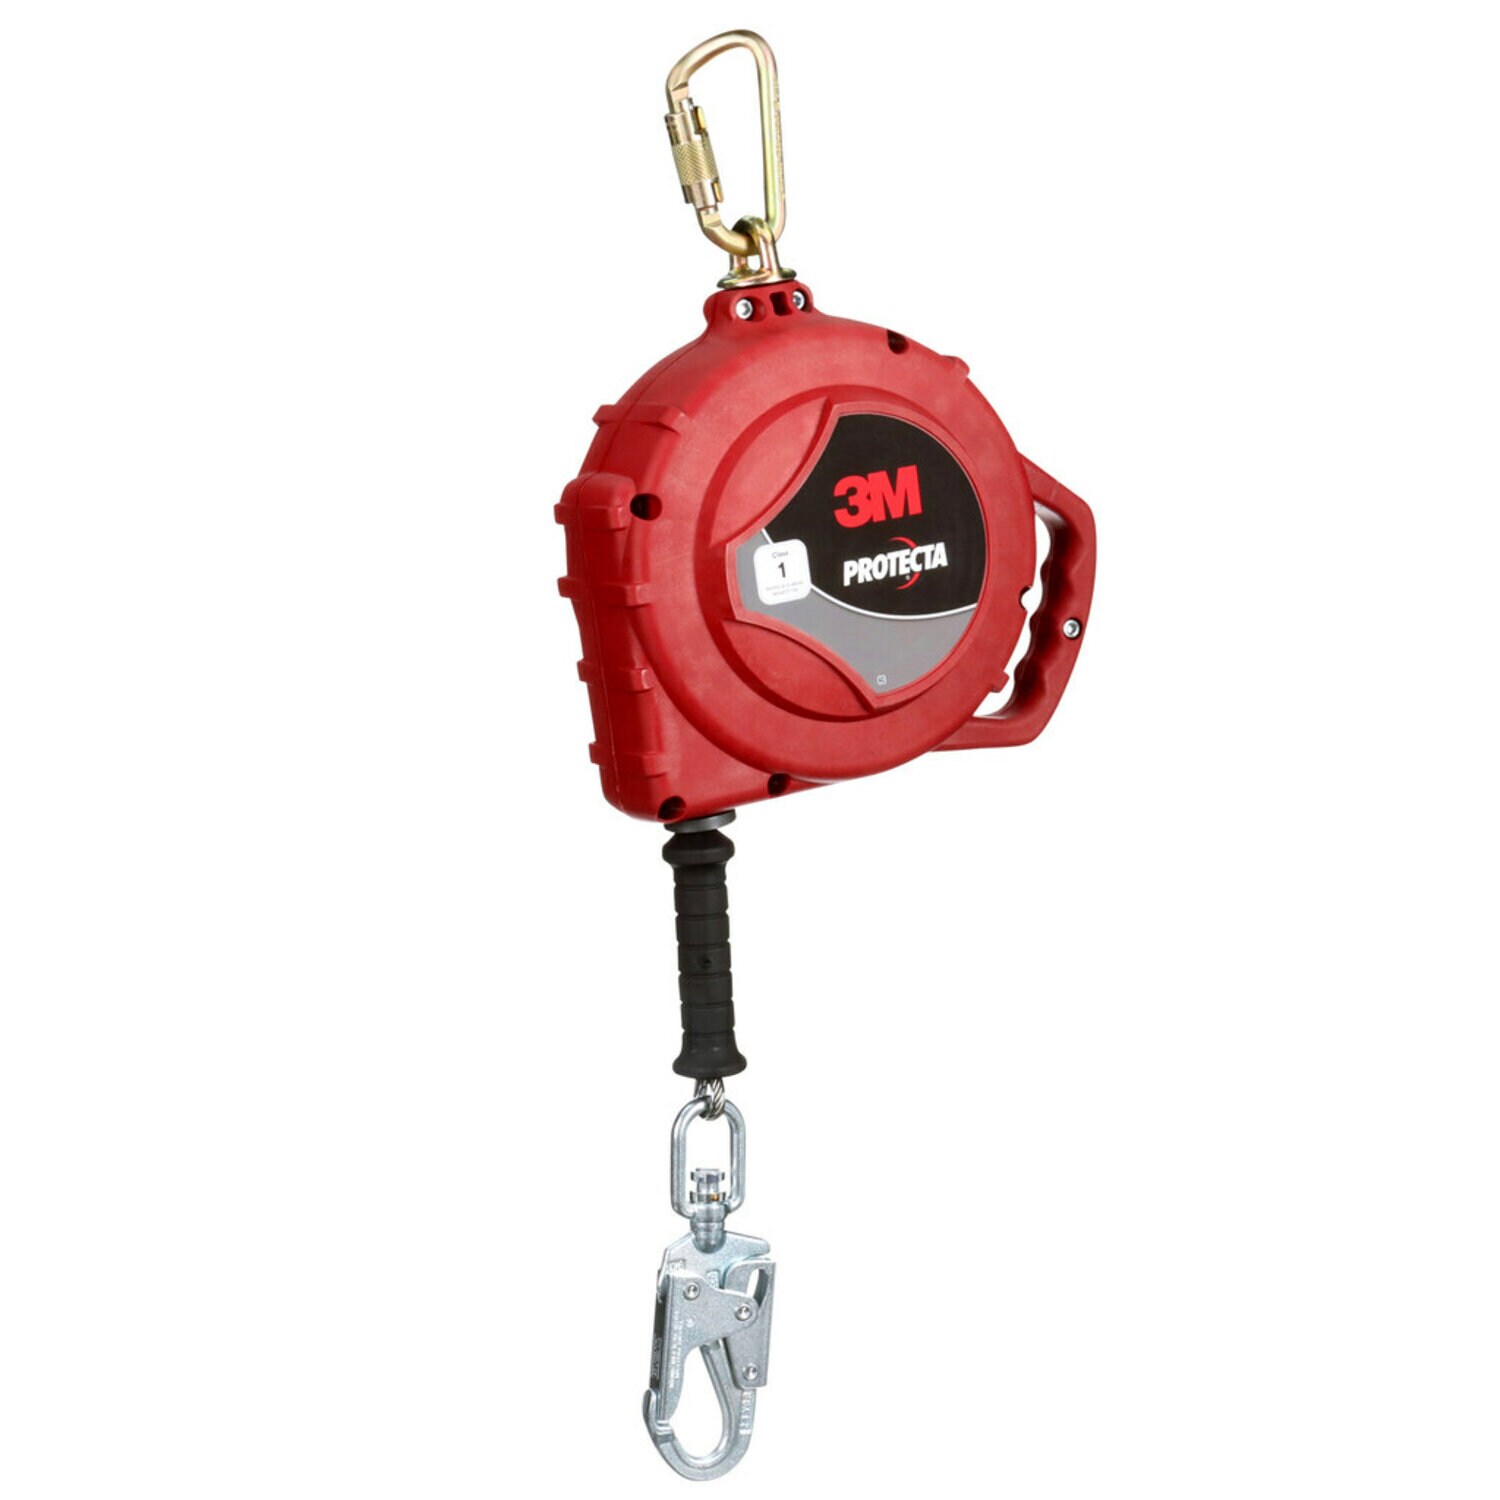 7100318439 - 3M Protecta Self-Retracting Lifeline 3590039, Stainless Steel Cable, Steel Swivel Snap Hook, 50ft., Class 1, ANSI